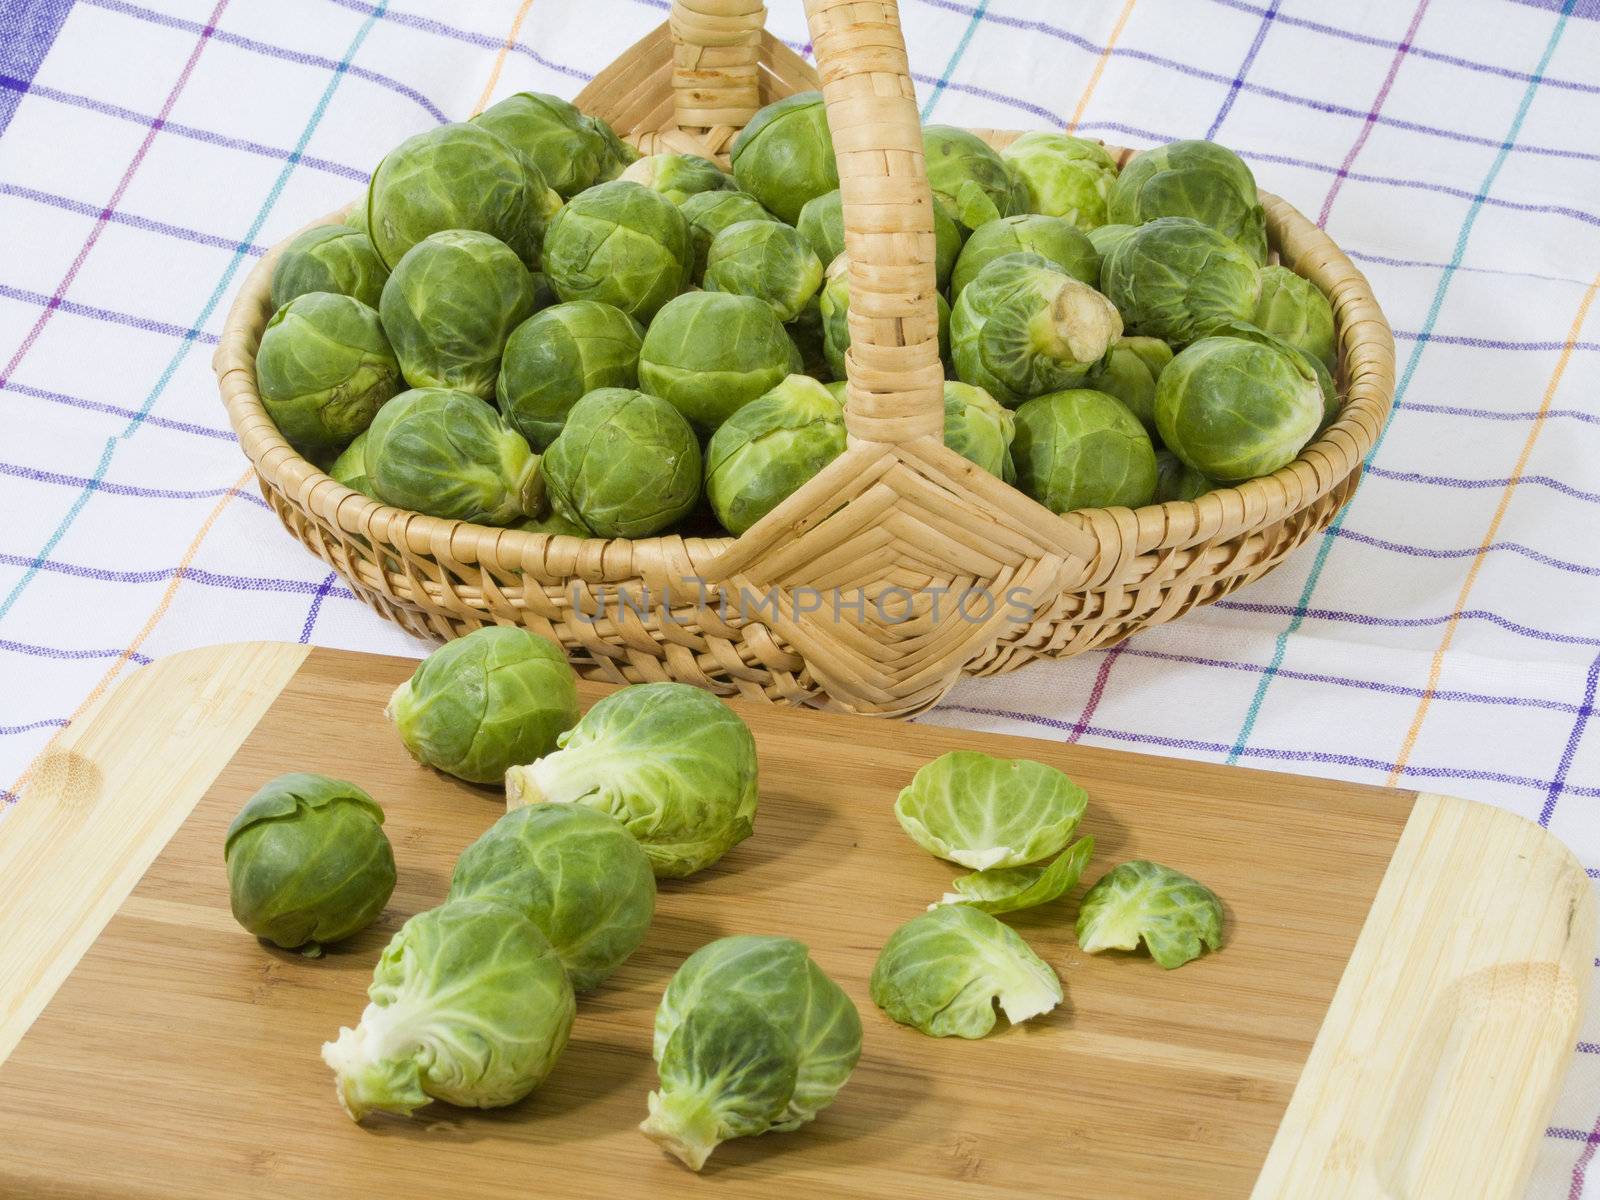 Preparation of brussels sprouts on a wooden plate